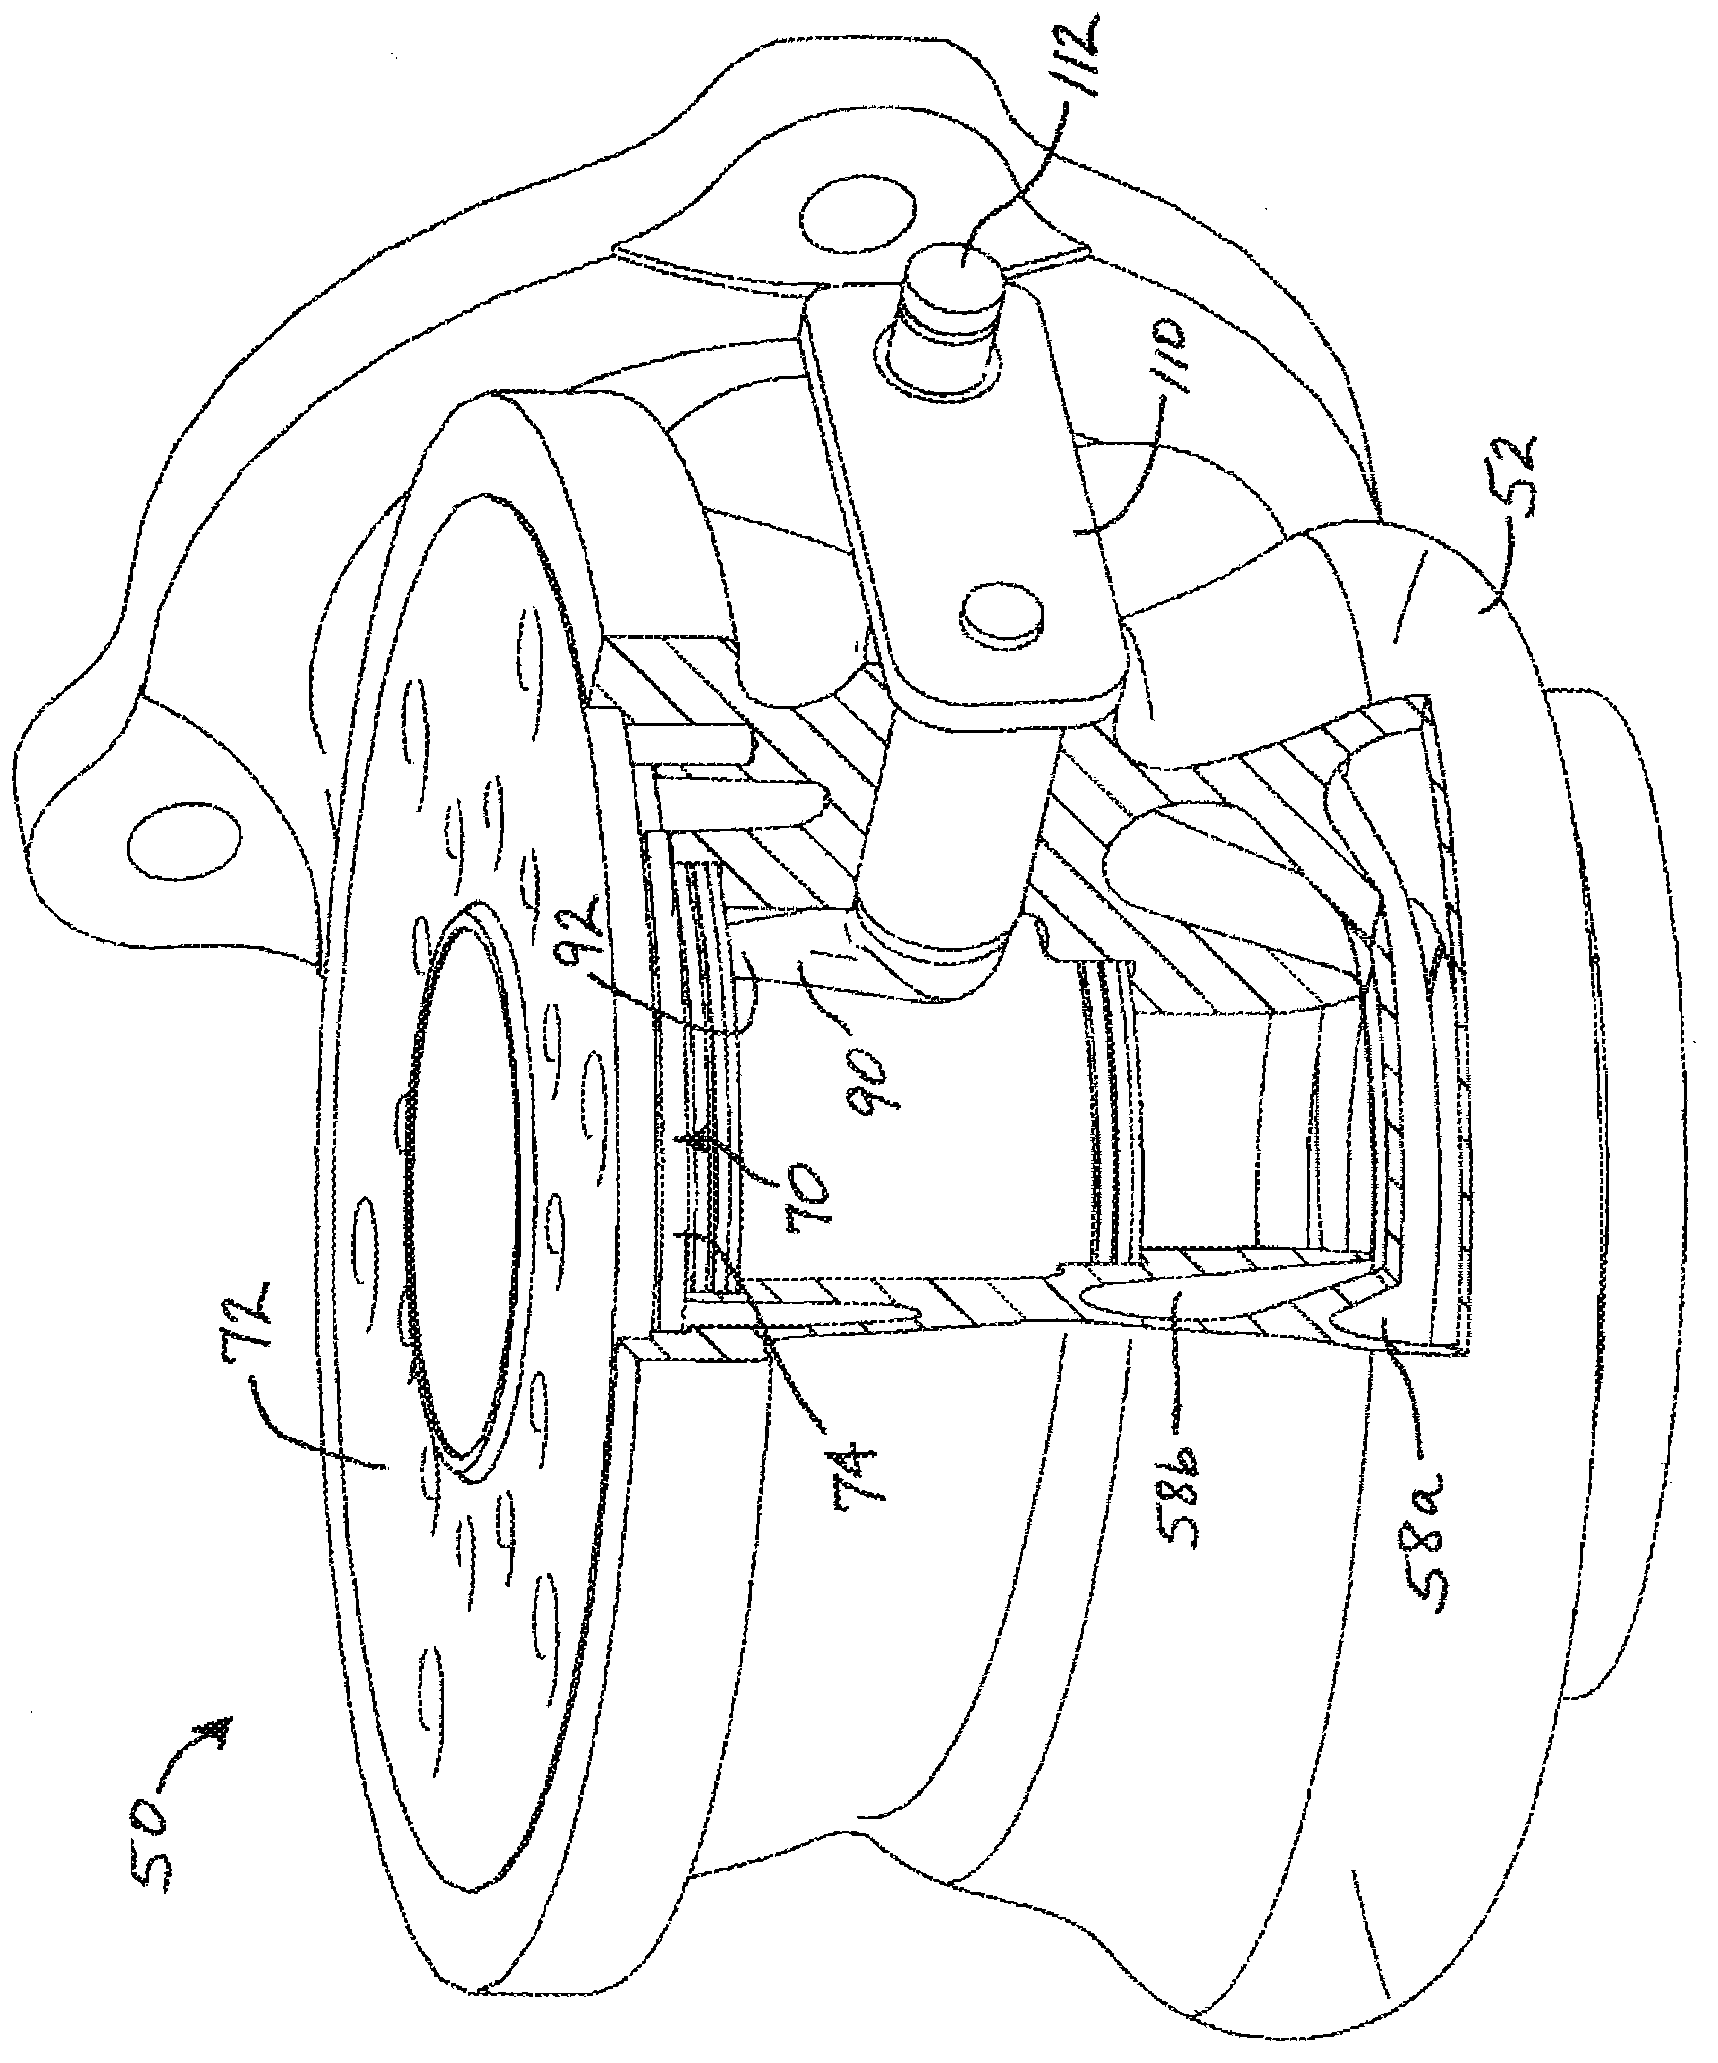 Turbocharger with divided turbine housing and annular rotary bypass valve for the turbine